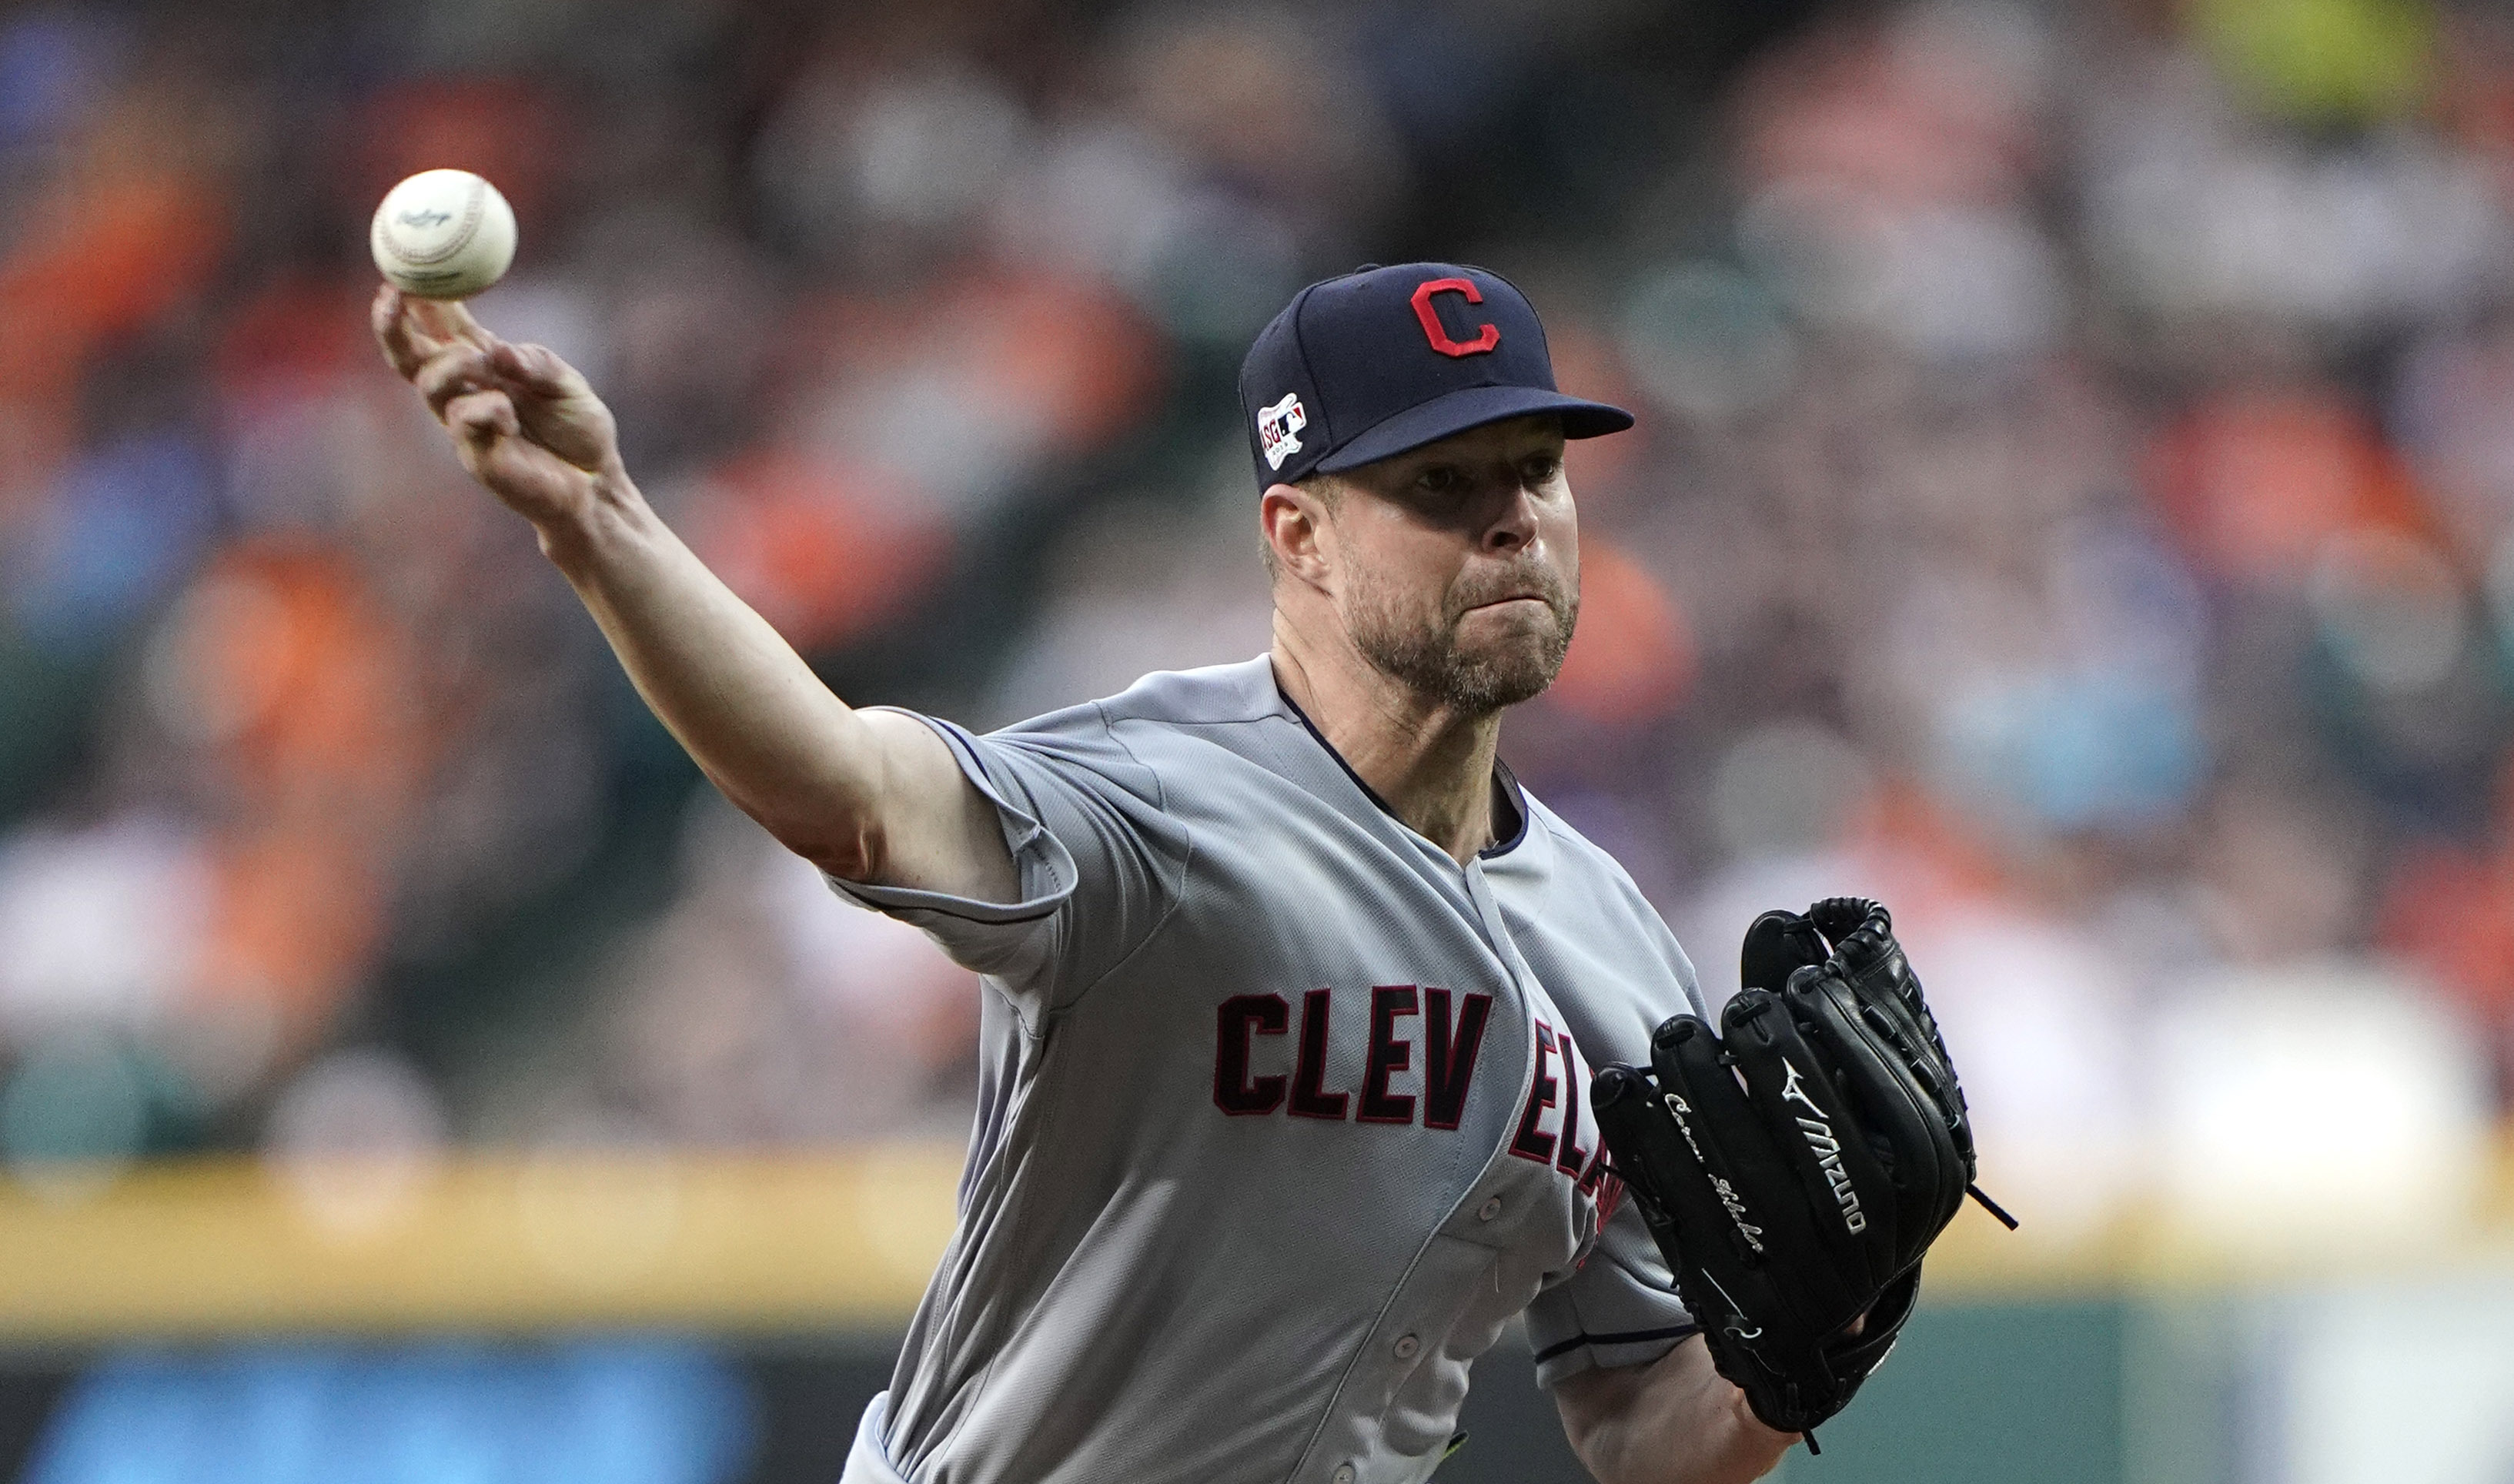 Kluber throws off mound for 1st time since breaking arm